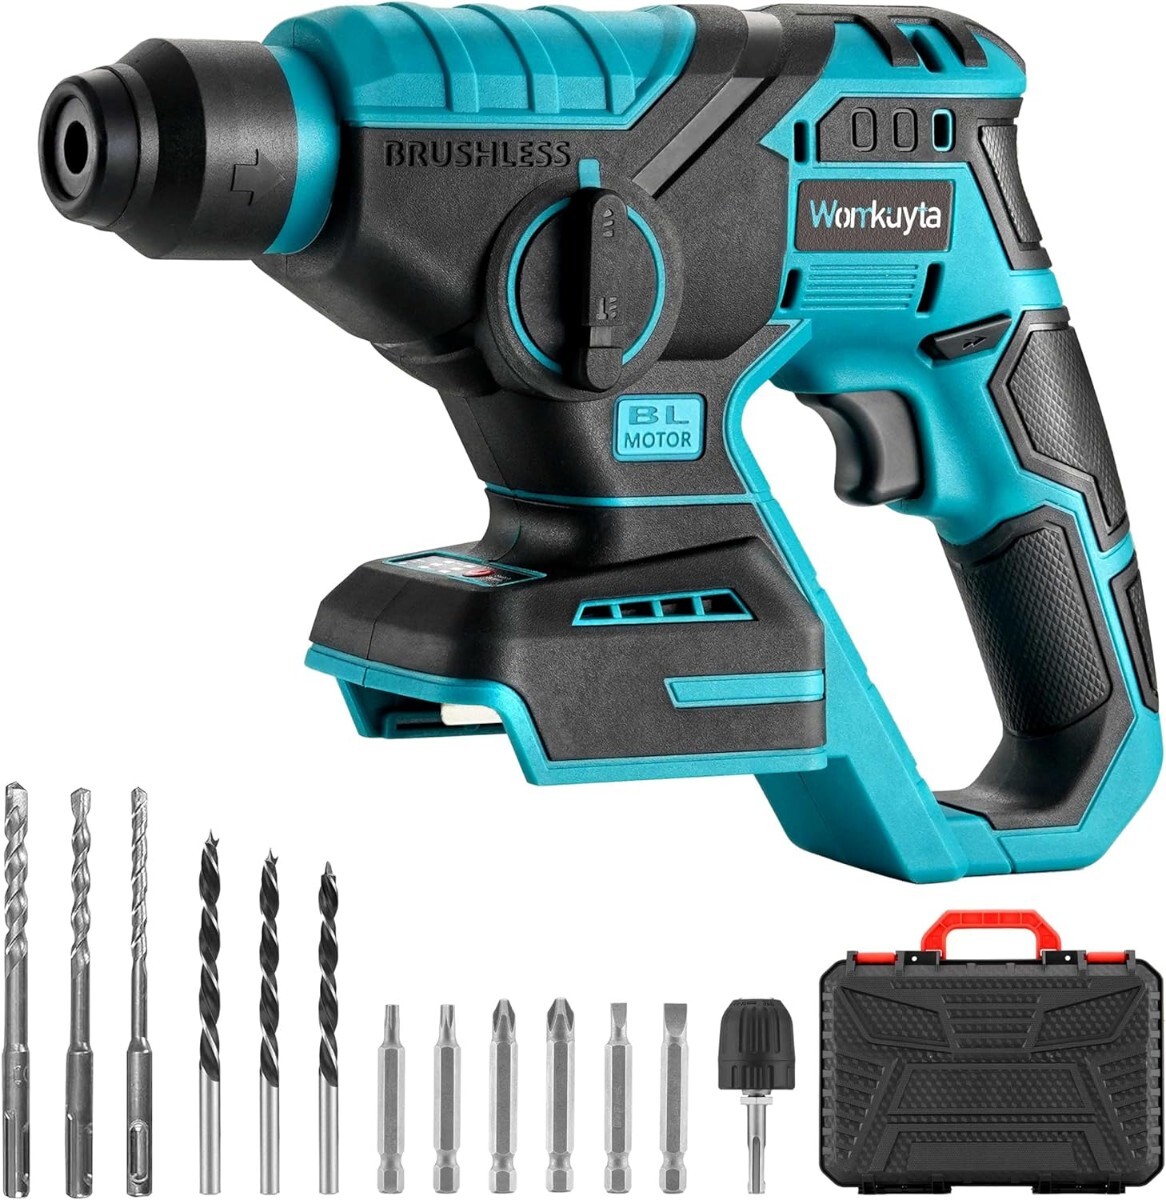 Womkuyta electro- type hammer drill 18V rechargeable drill strike . drill regular reversal both for Makita interchangeable 18V BL1830 BL1860 etc. new system correspondence receipt possible 